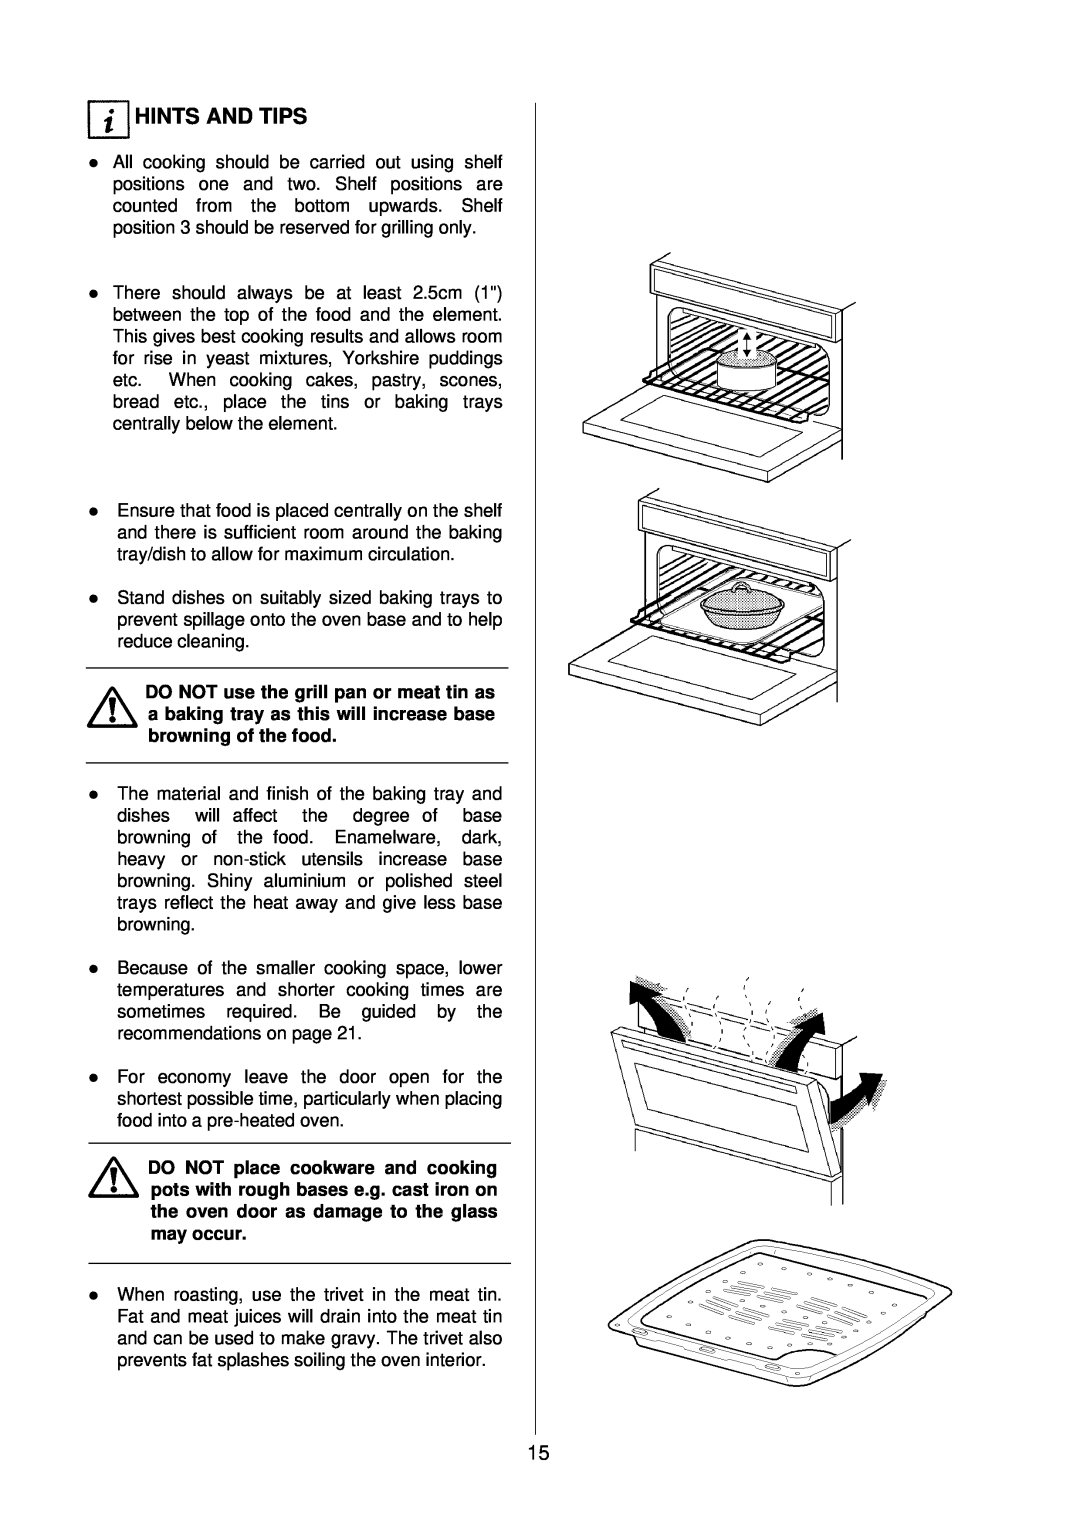 AEG D4100-1 manual Hints And Tips, lposition 3 should be reserved for grilling only 